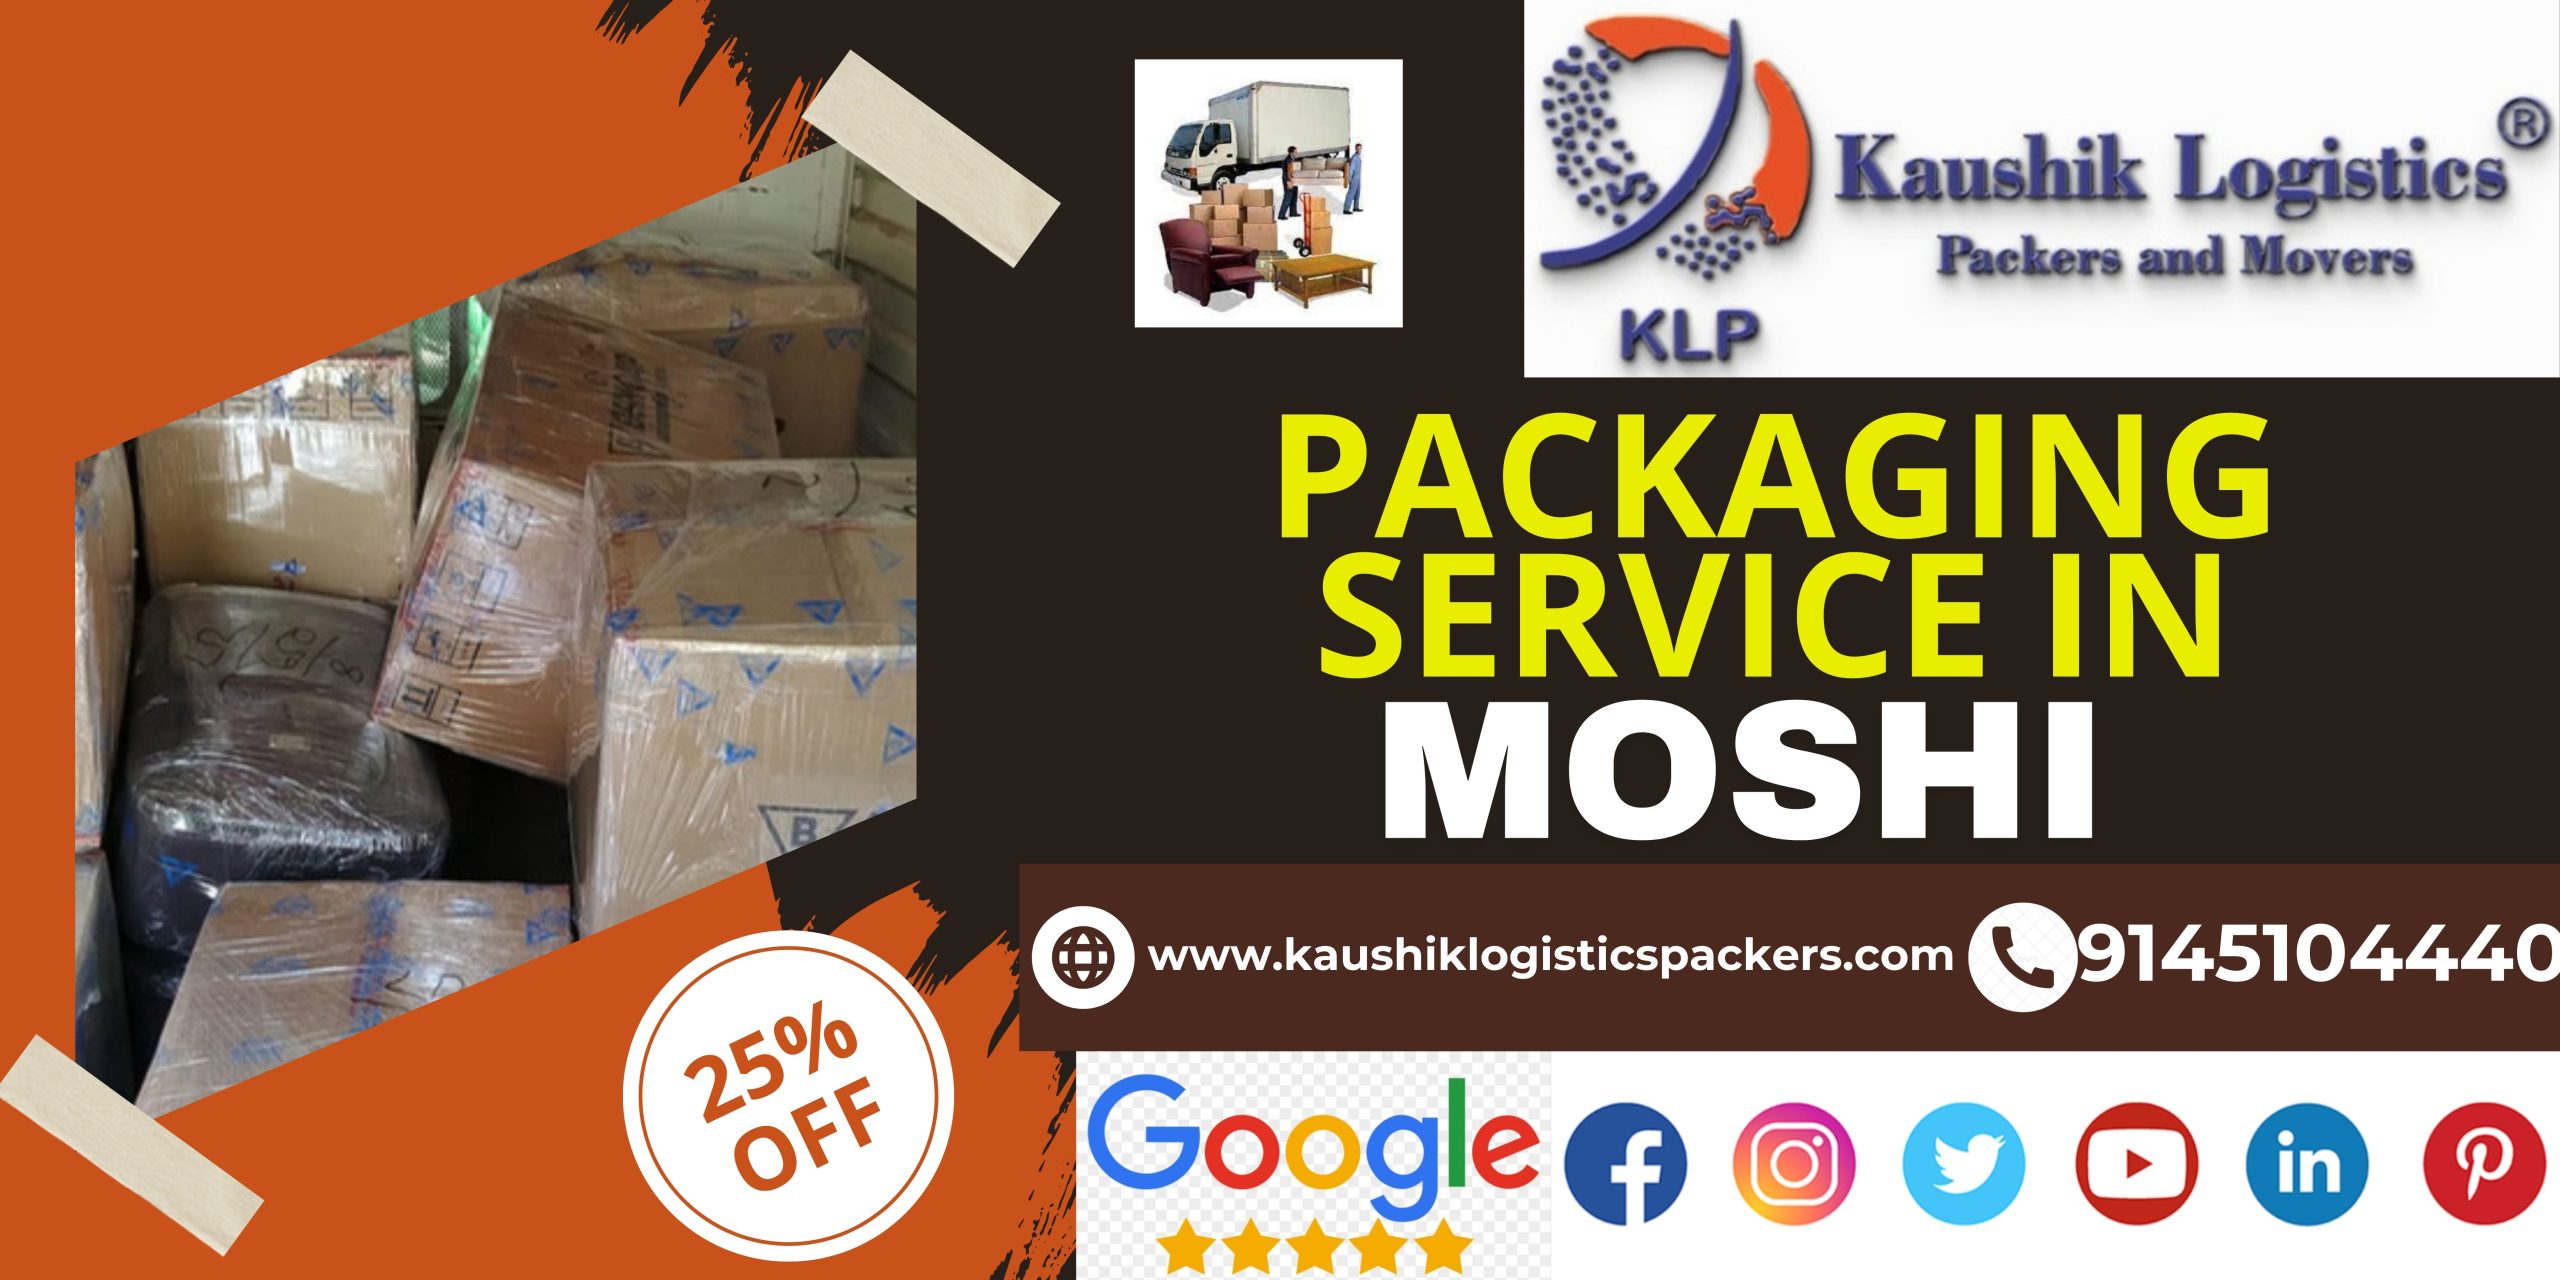 Packers and Movers In Moshi